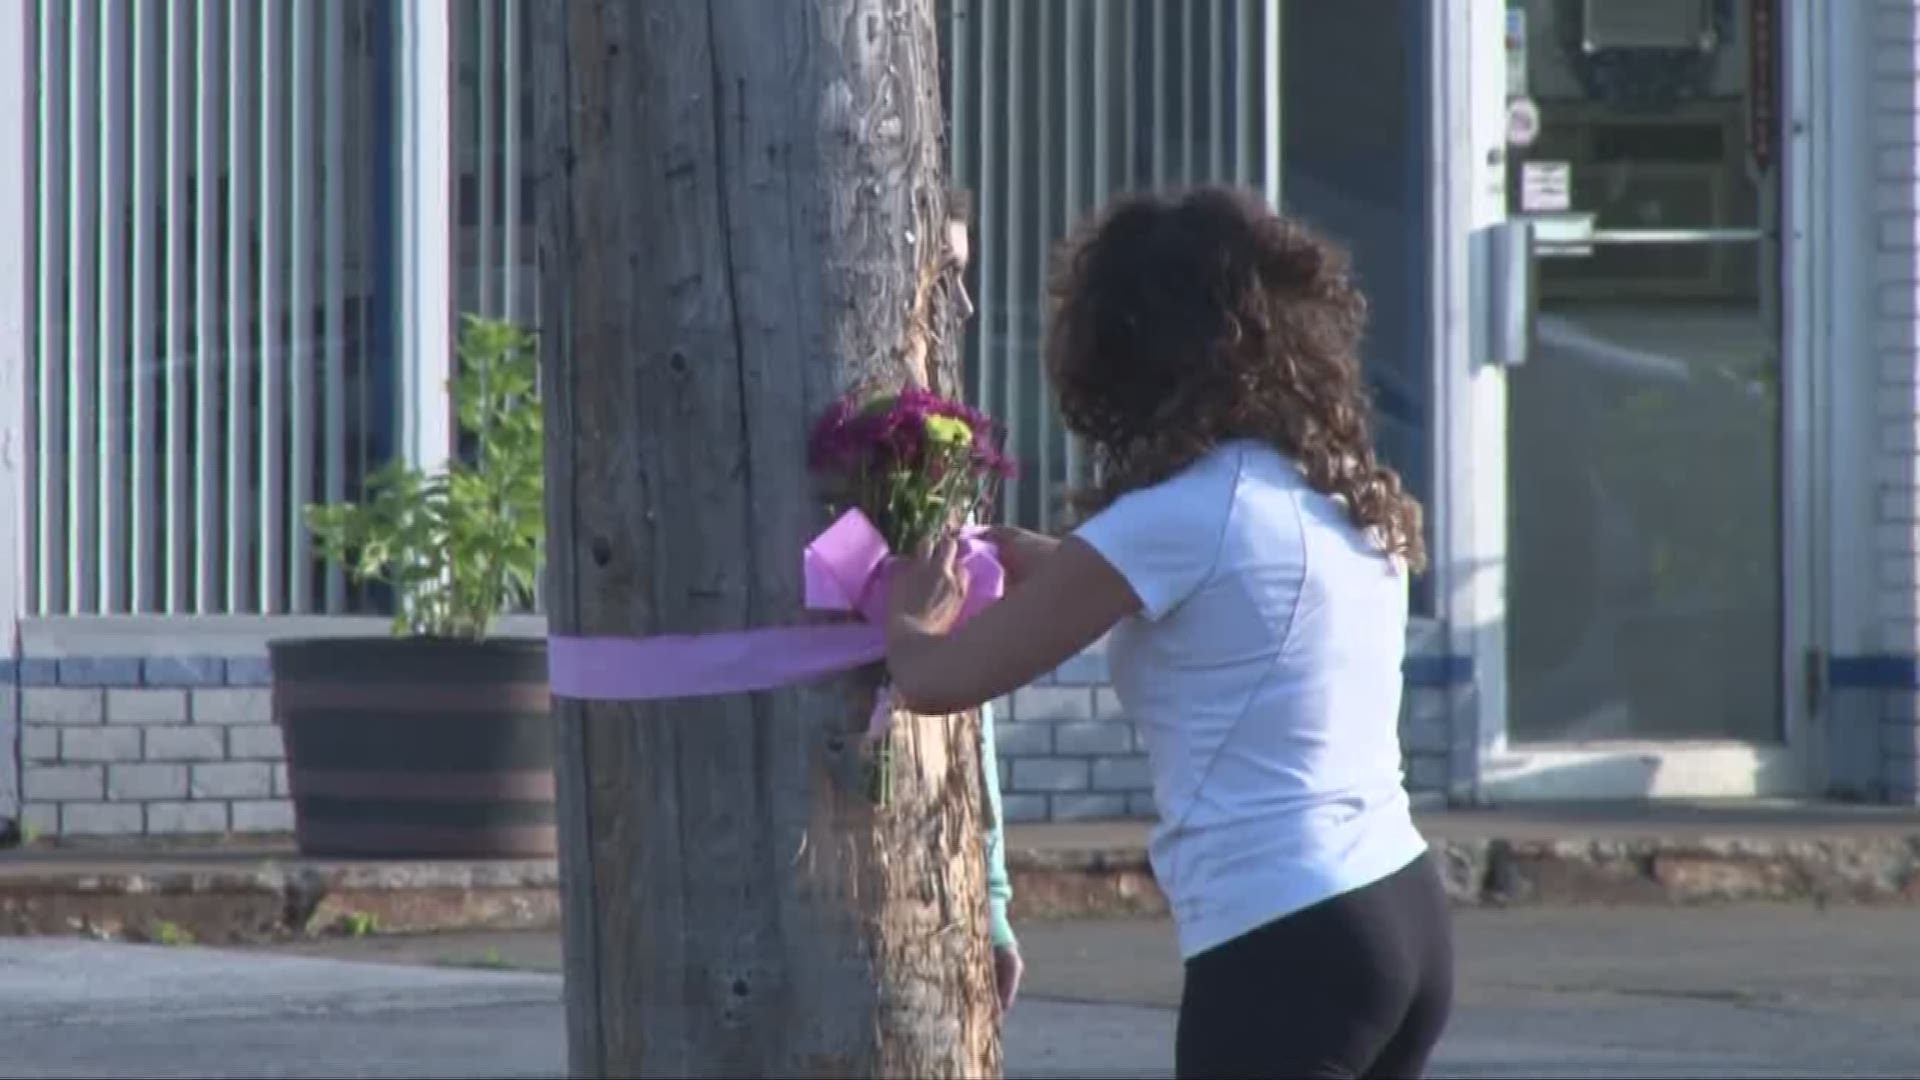 17-year-old Eastlake girl fatally struck by truck